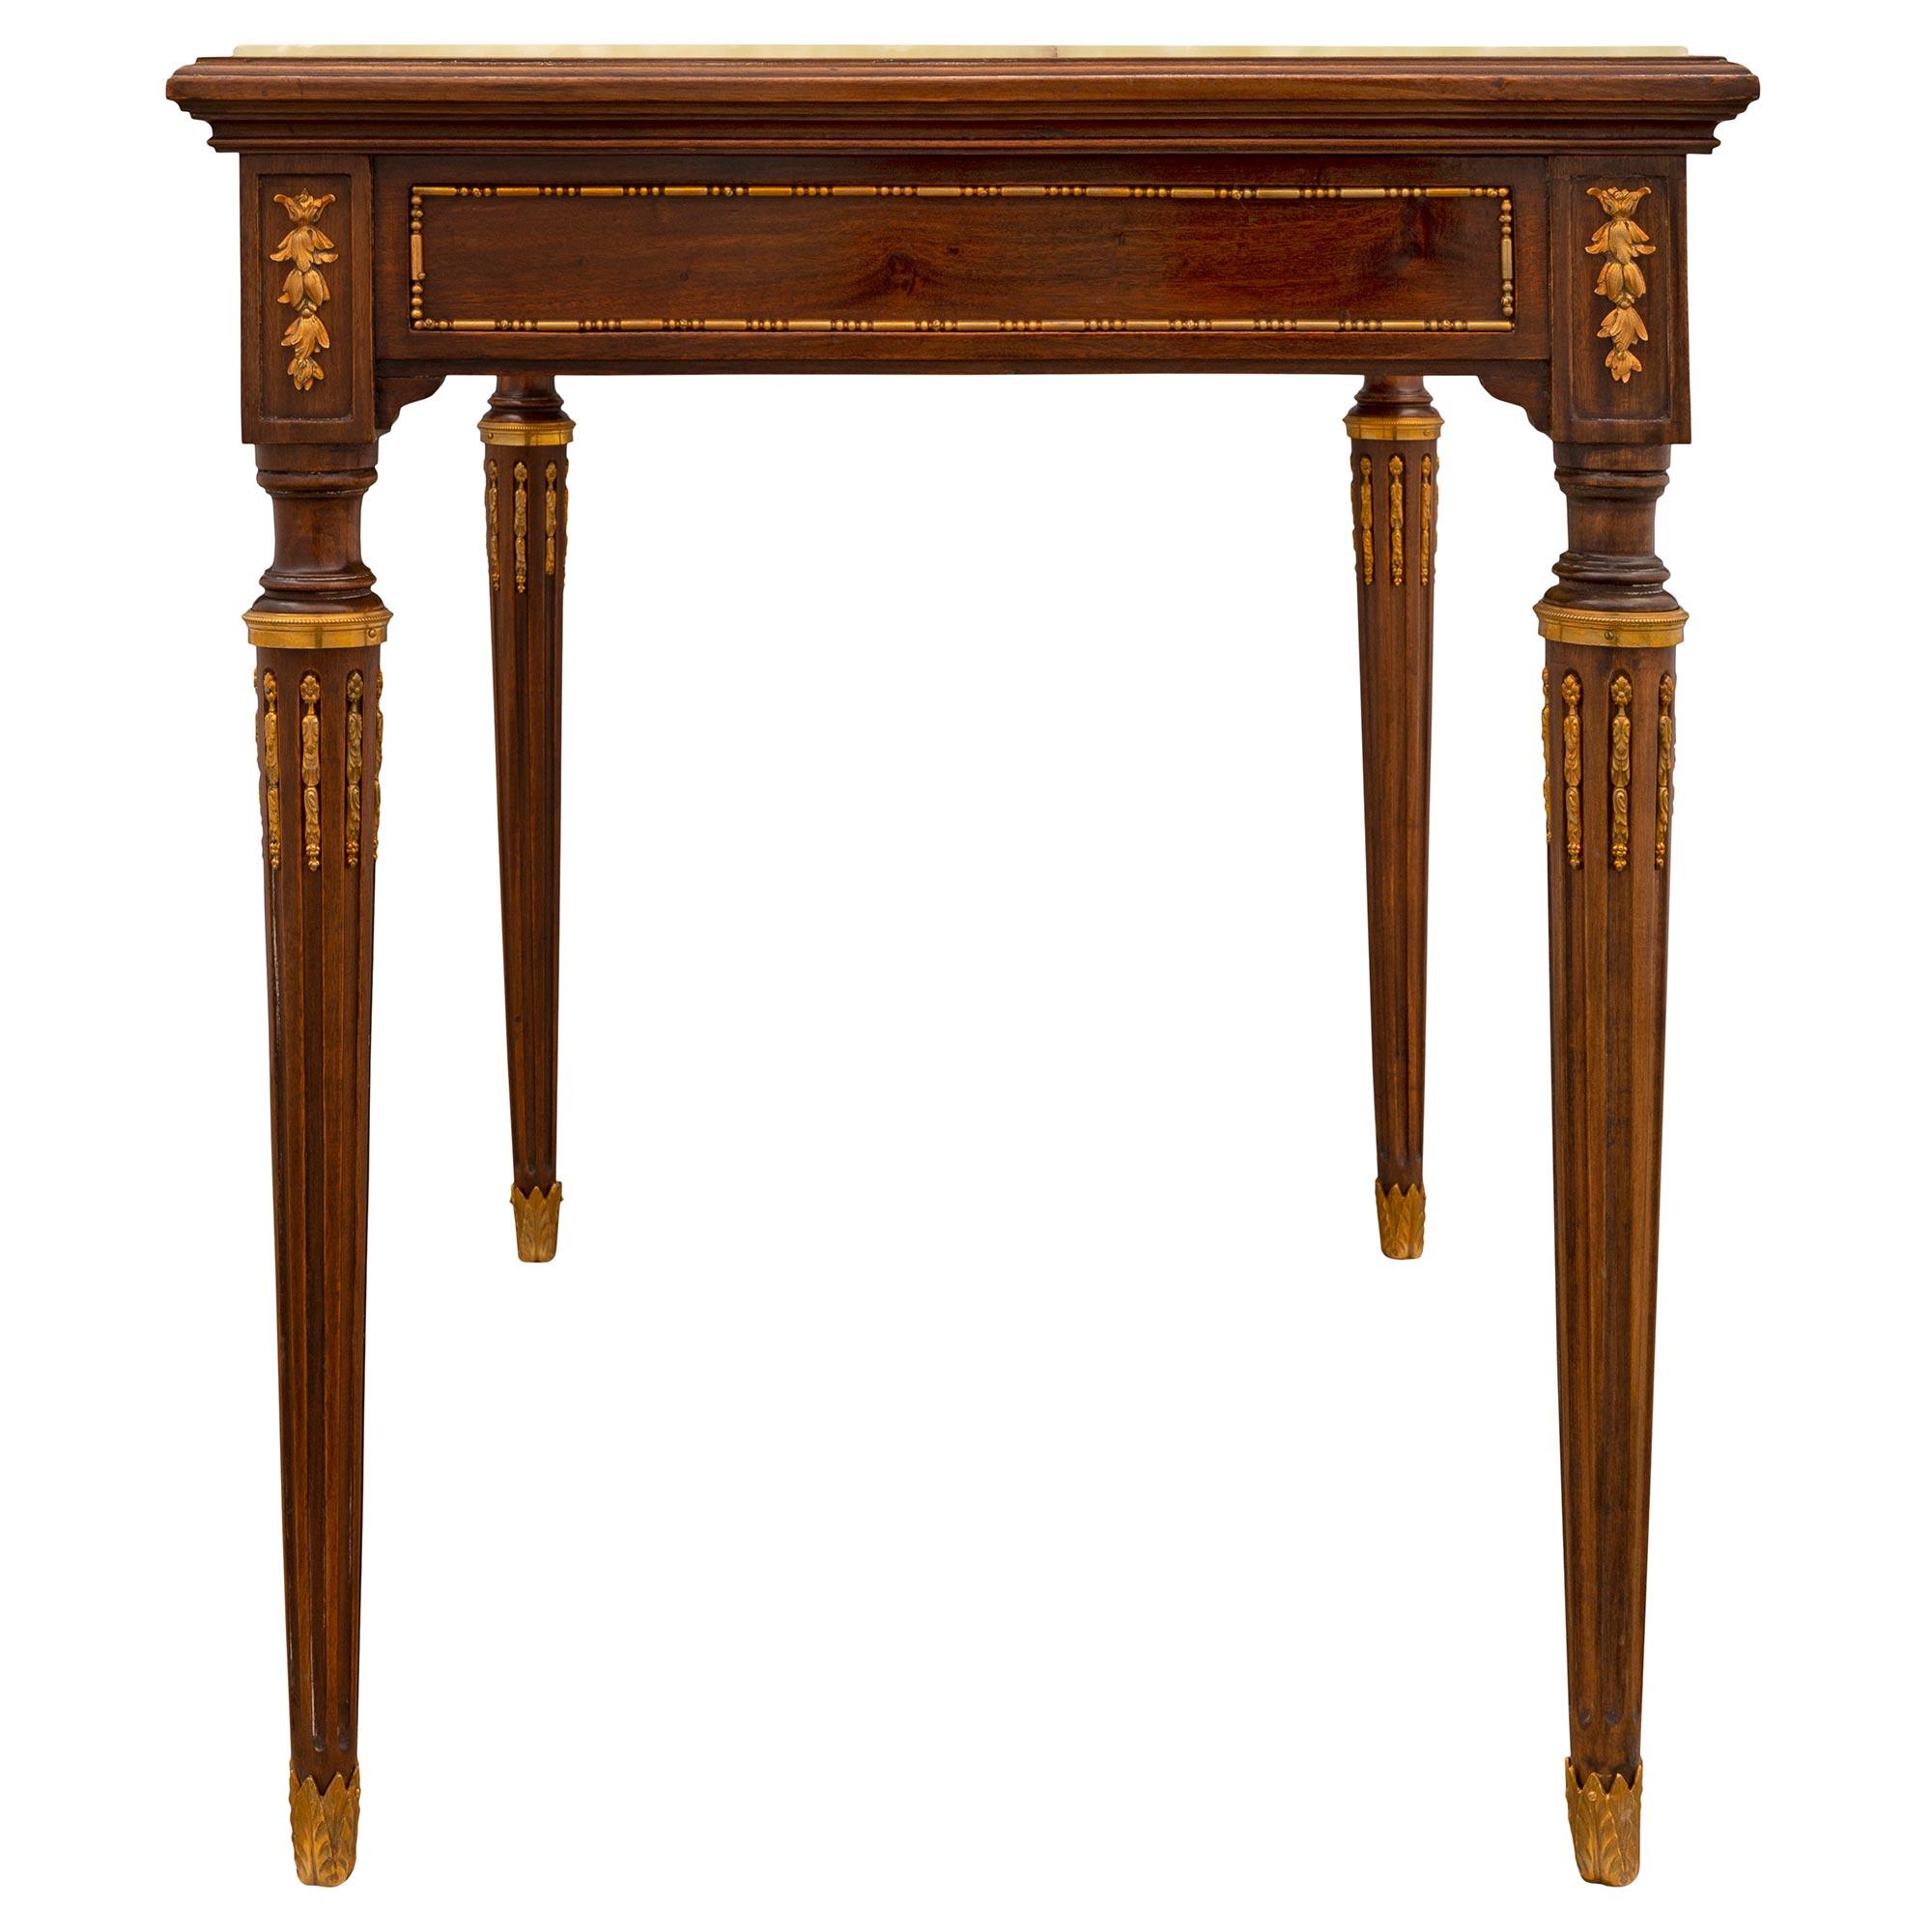 French 19th Century Louis XVI Style Mahogany, Onyx and Ormolu Table For Sale 1